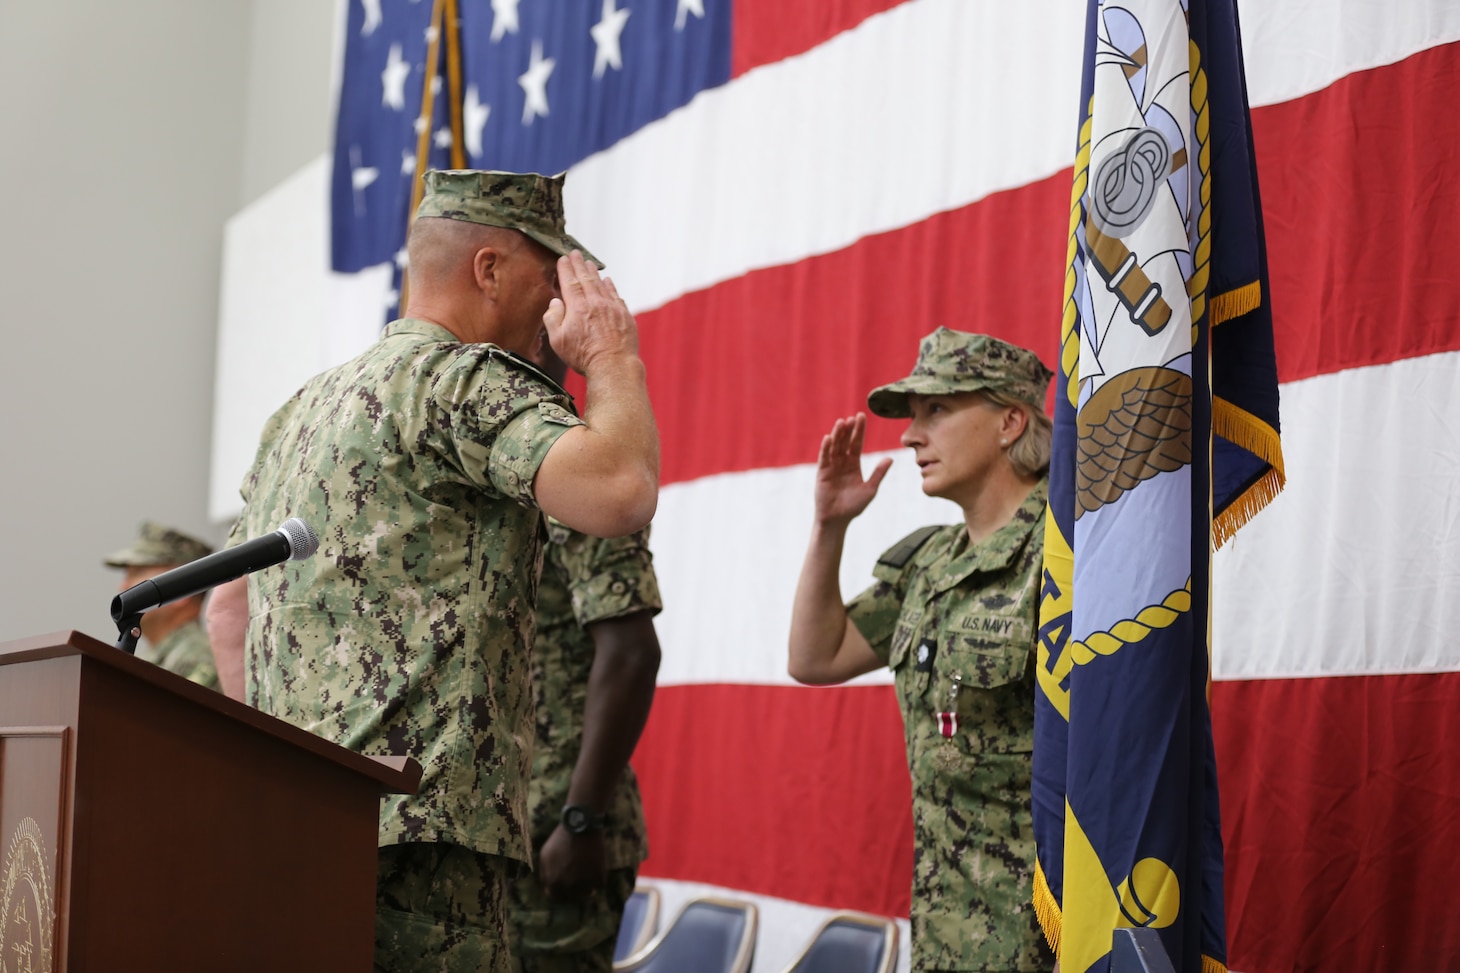 Cmdr. Kimberly Oelschlager relieved by Cmdr. Thomas Murphy during the change of charge ceremony for Navy Medicine and Training Unit Fallon located aboard Naval Air Station Fallon.